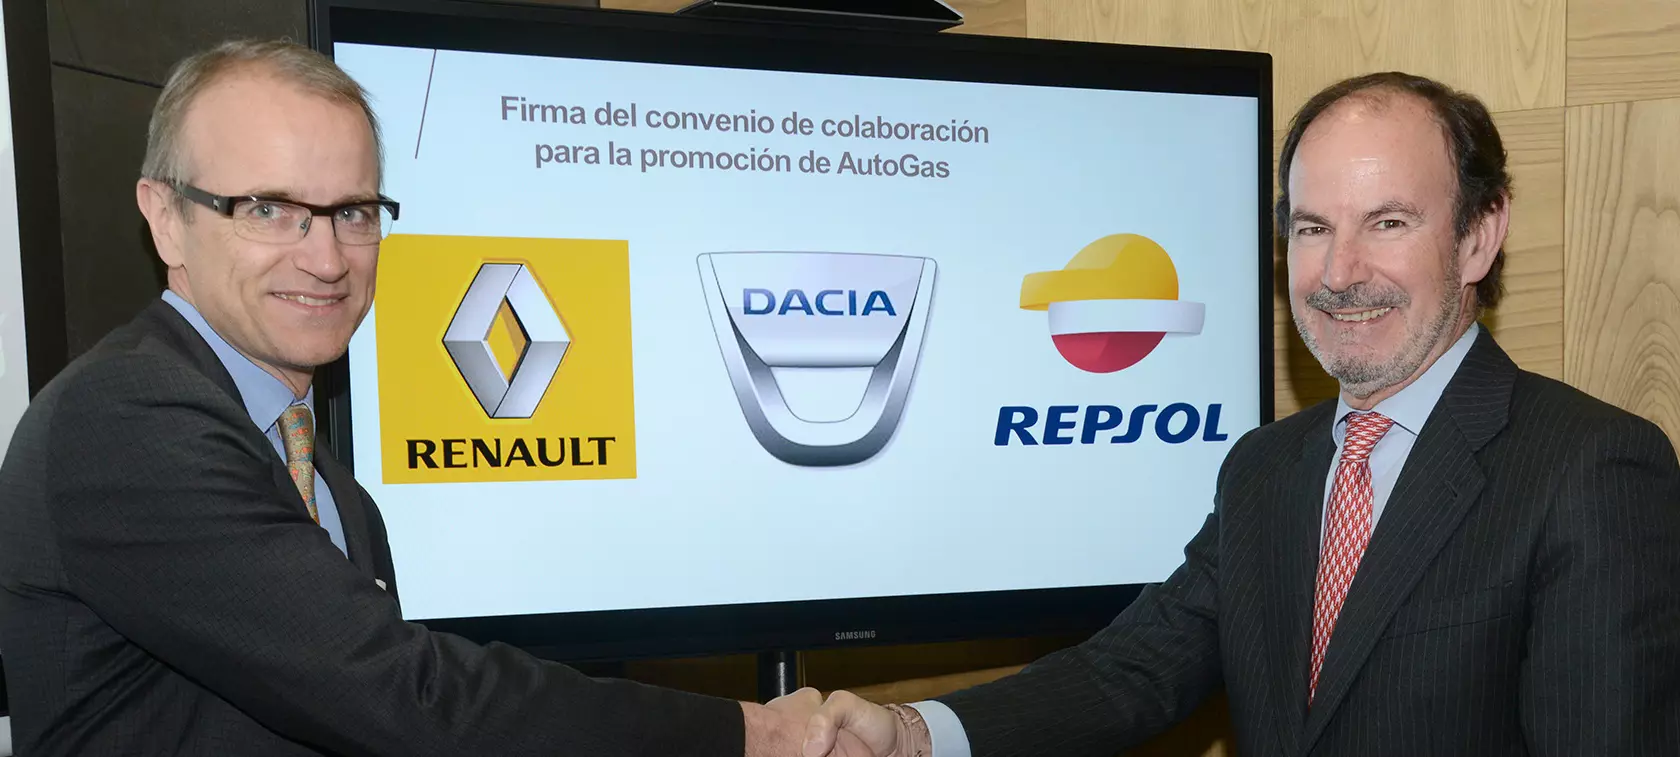 Repsol and Renault support autogas in Spain